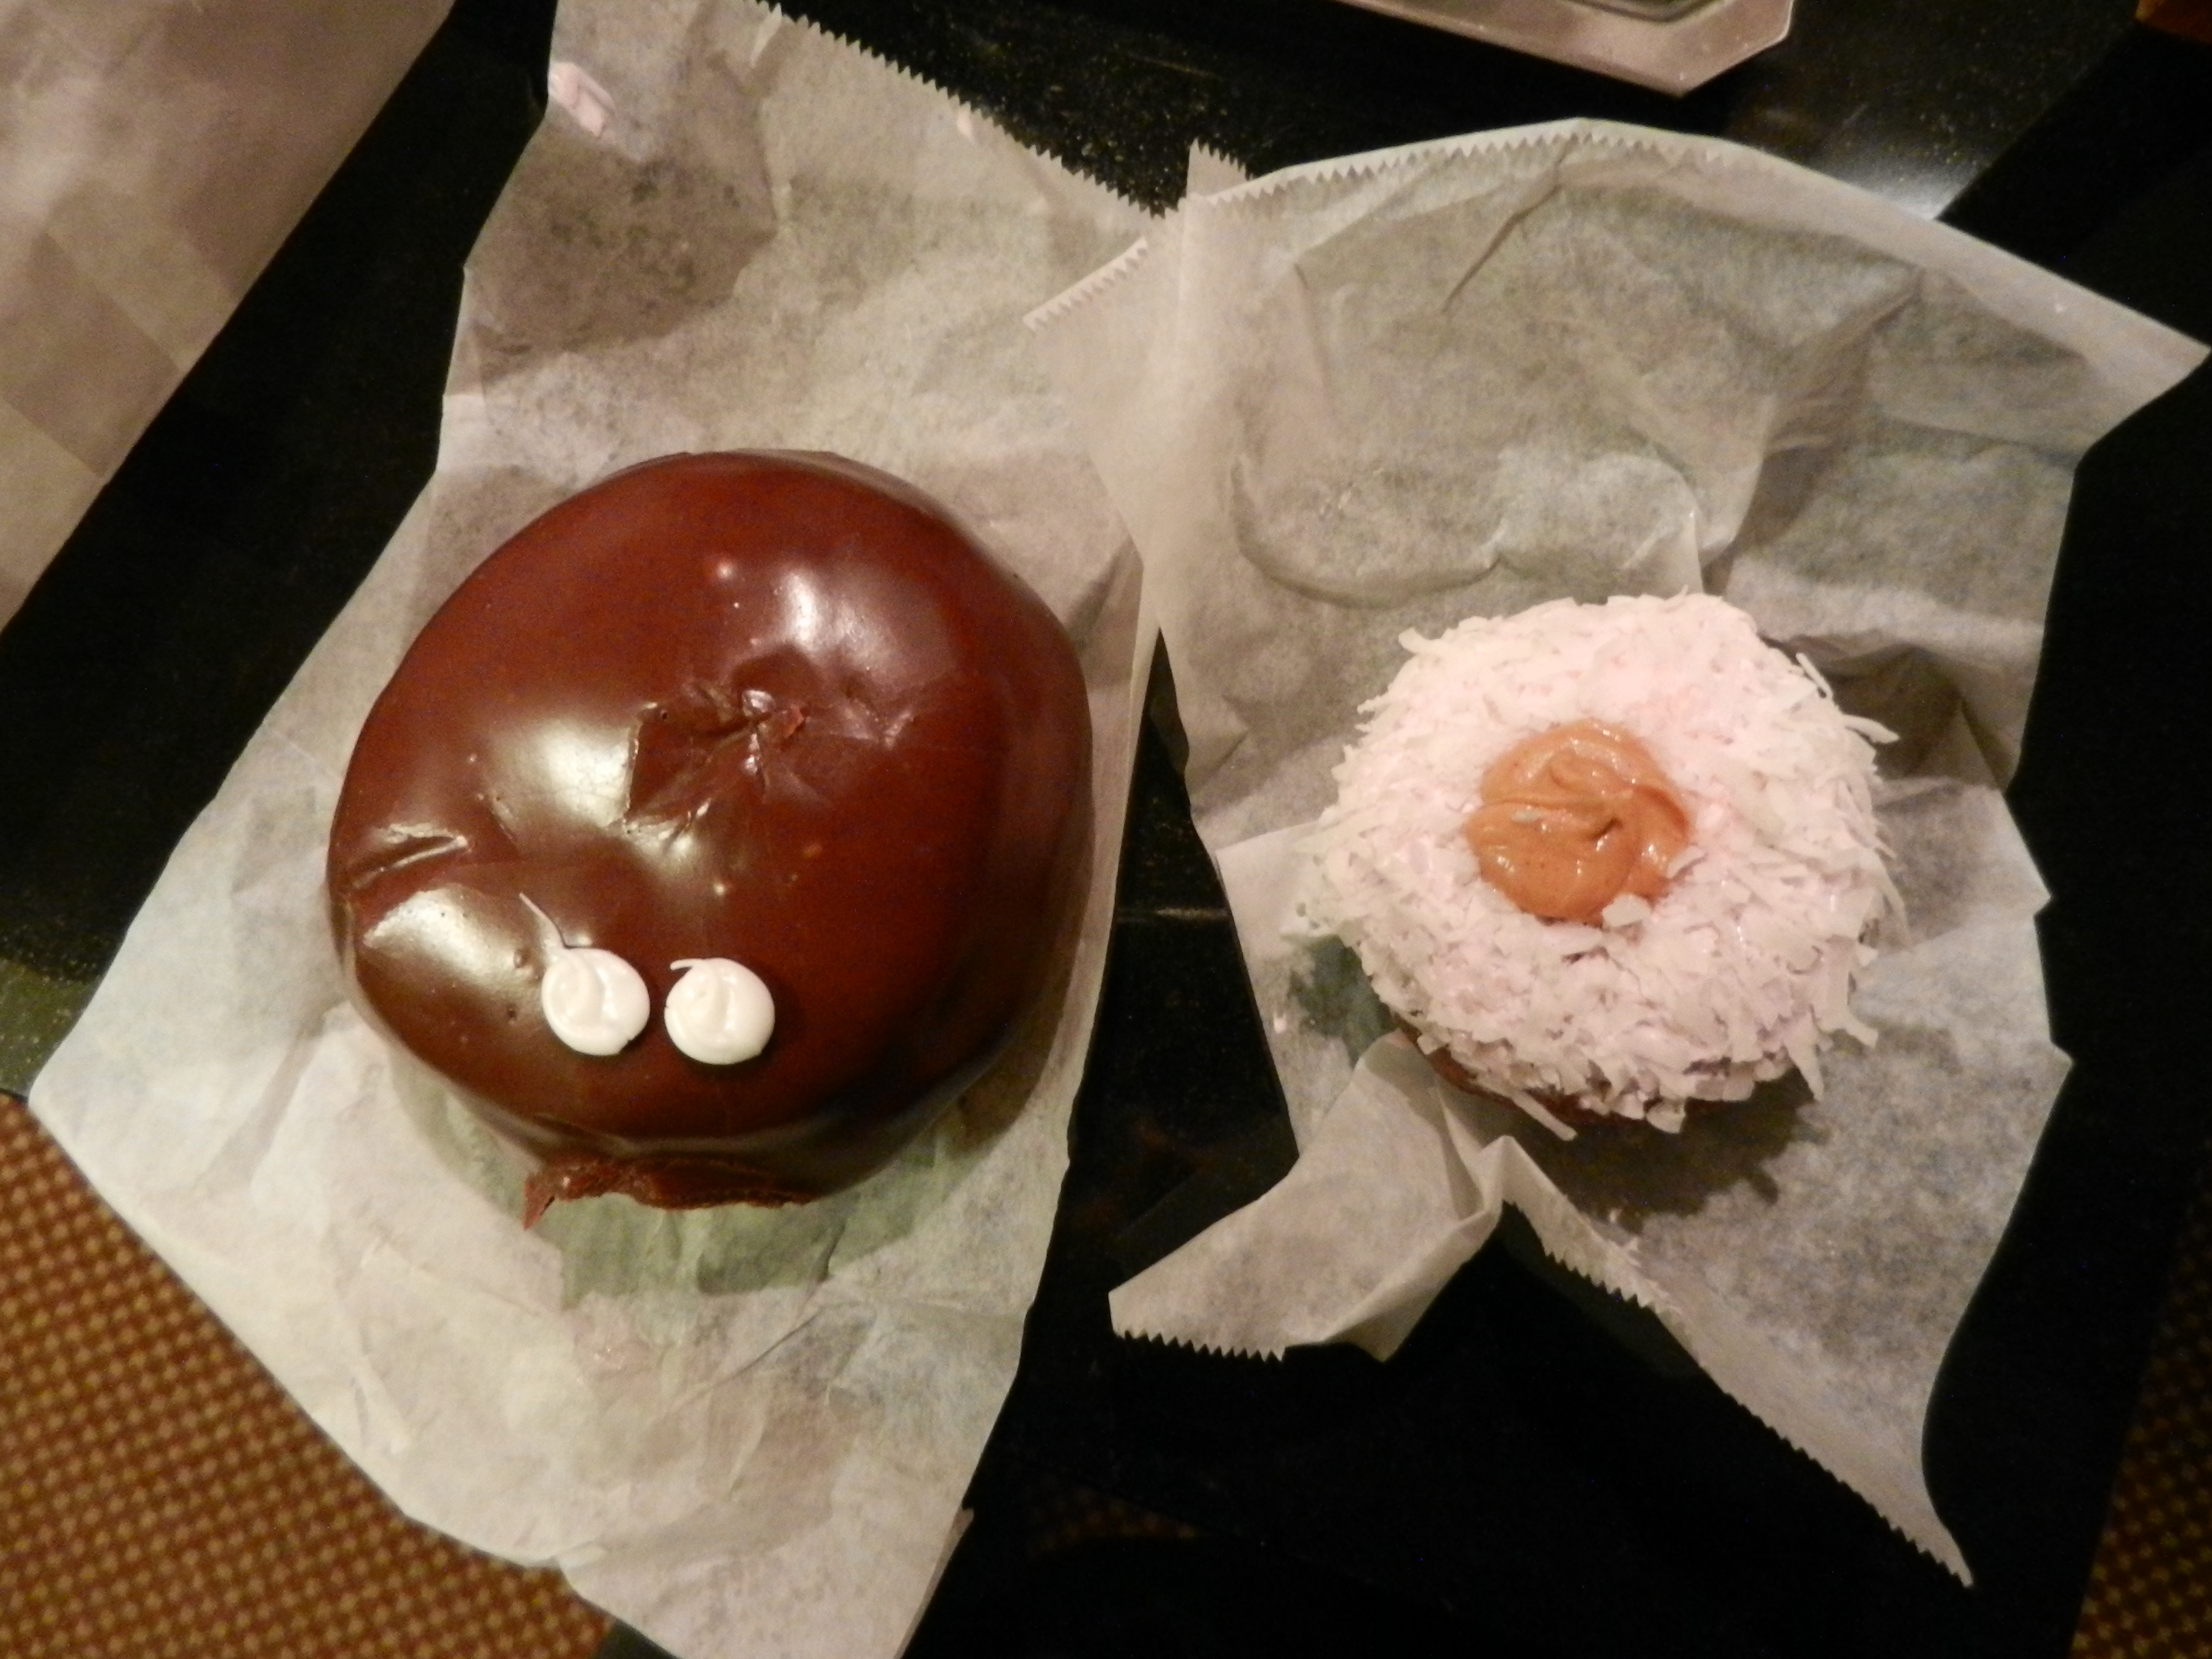 Two doughnuts - on the left a donut with chocolate frosting and two white "eyes" and on the right a doughnut with pink frosting, coconut on top, and peanut butter in the middle.